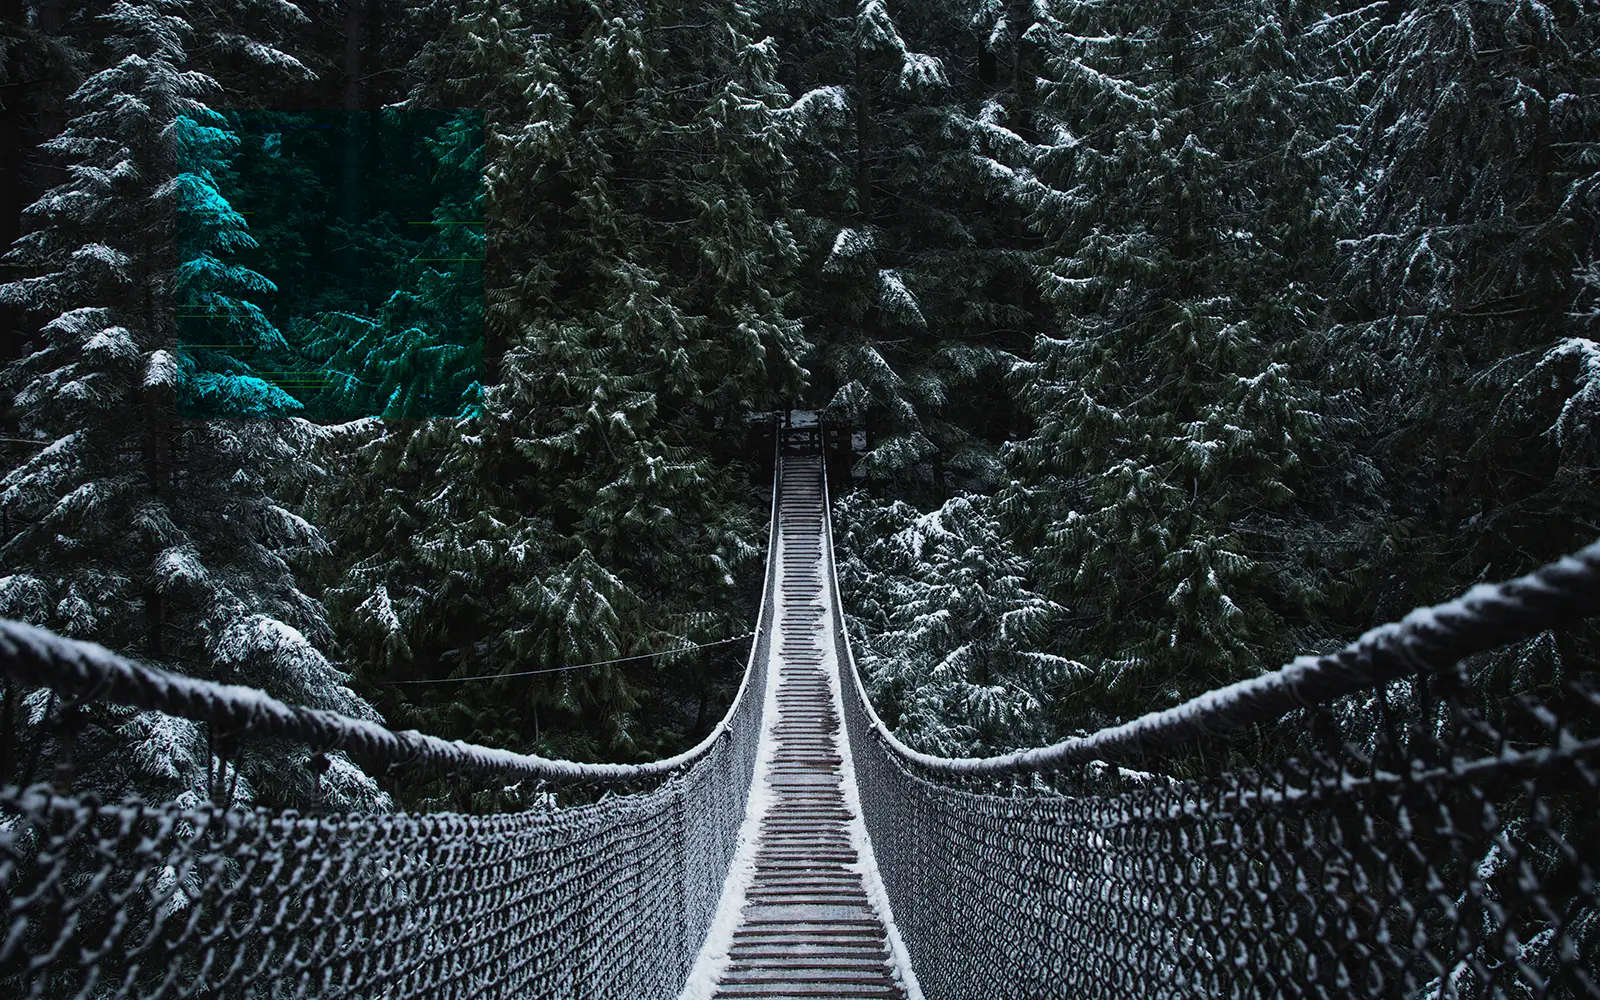 Snowy bridge in the BC forest.